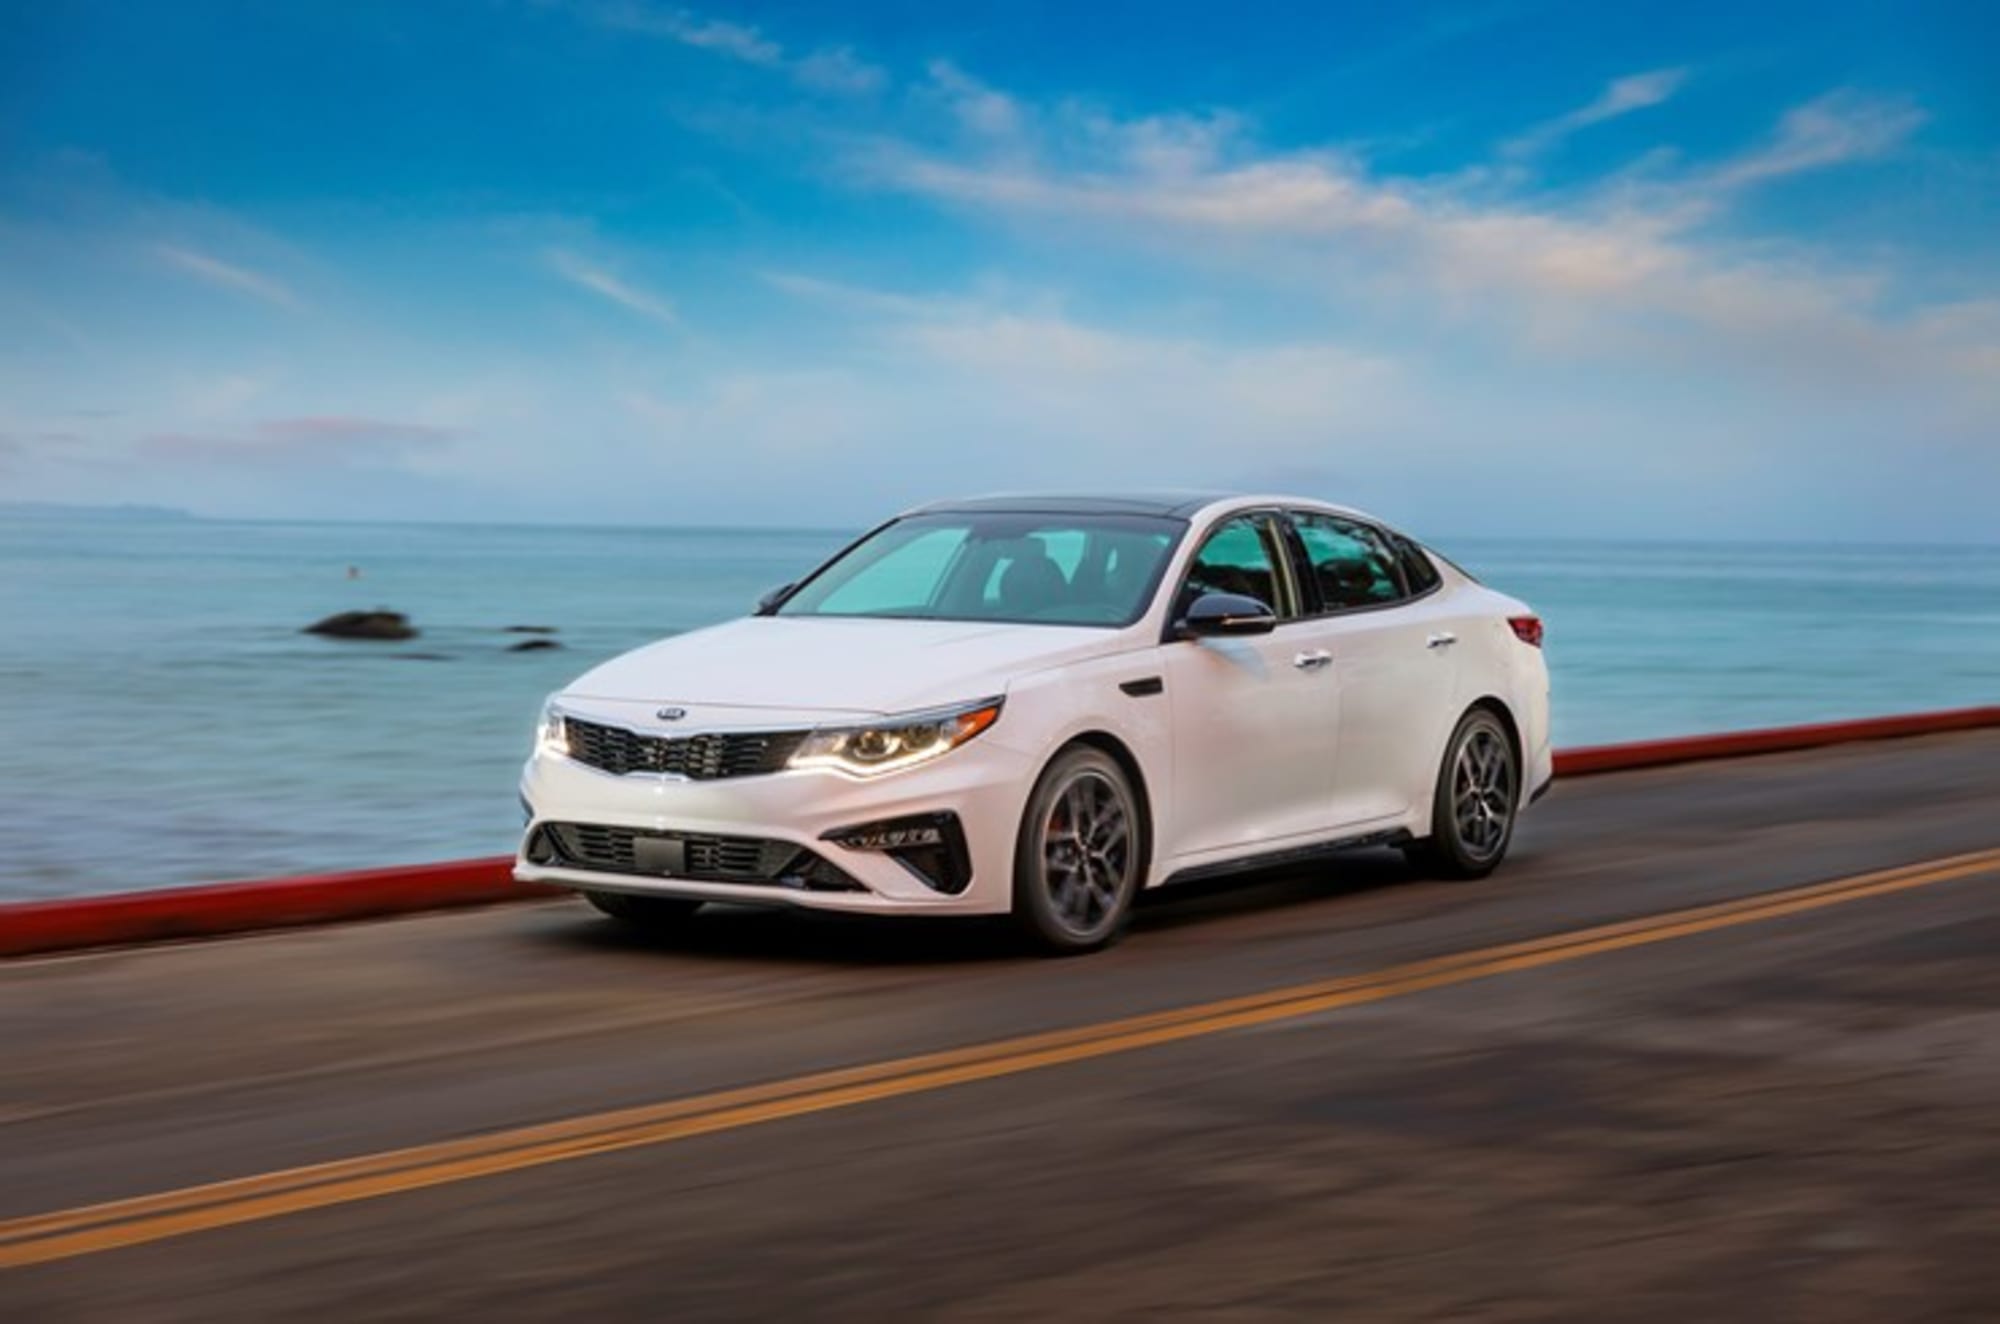 2019 Kia Optima Review After A Week With The Vehicle